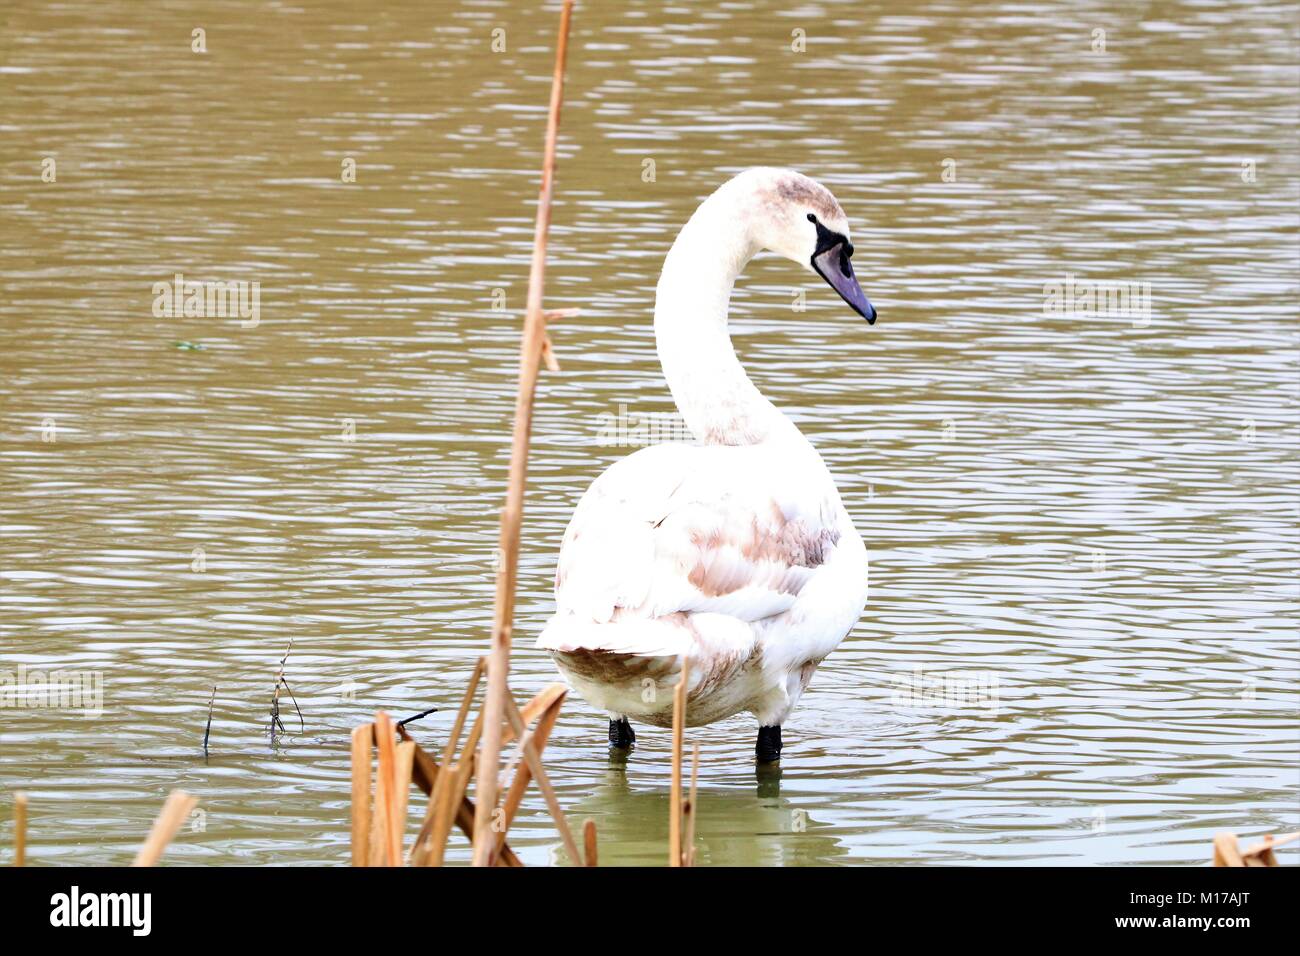 White swan stood in water looking for food Stock Photo